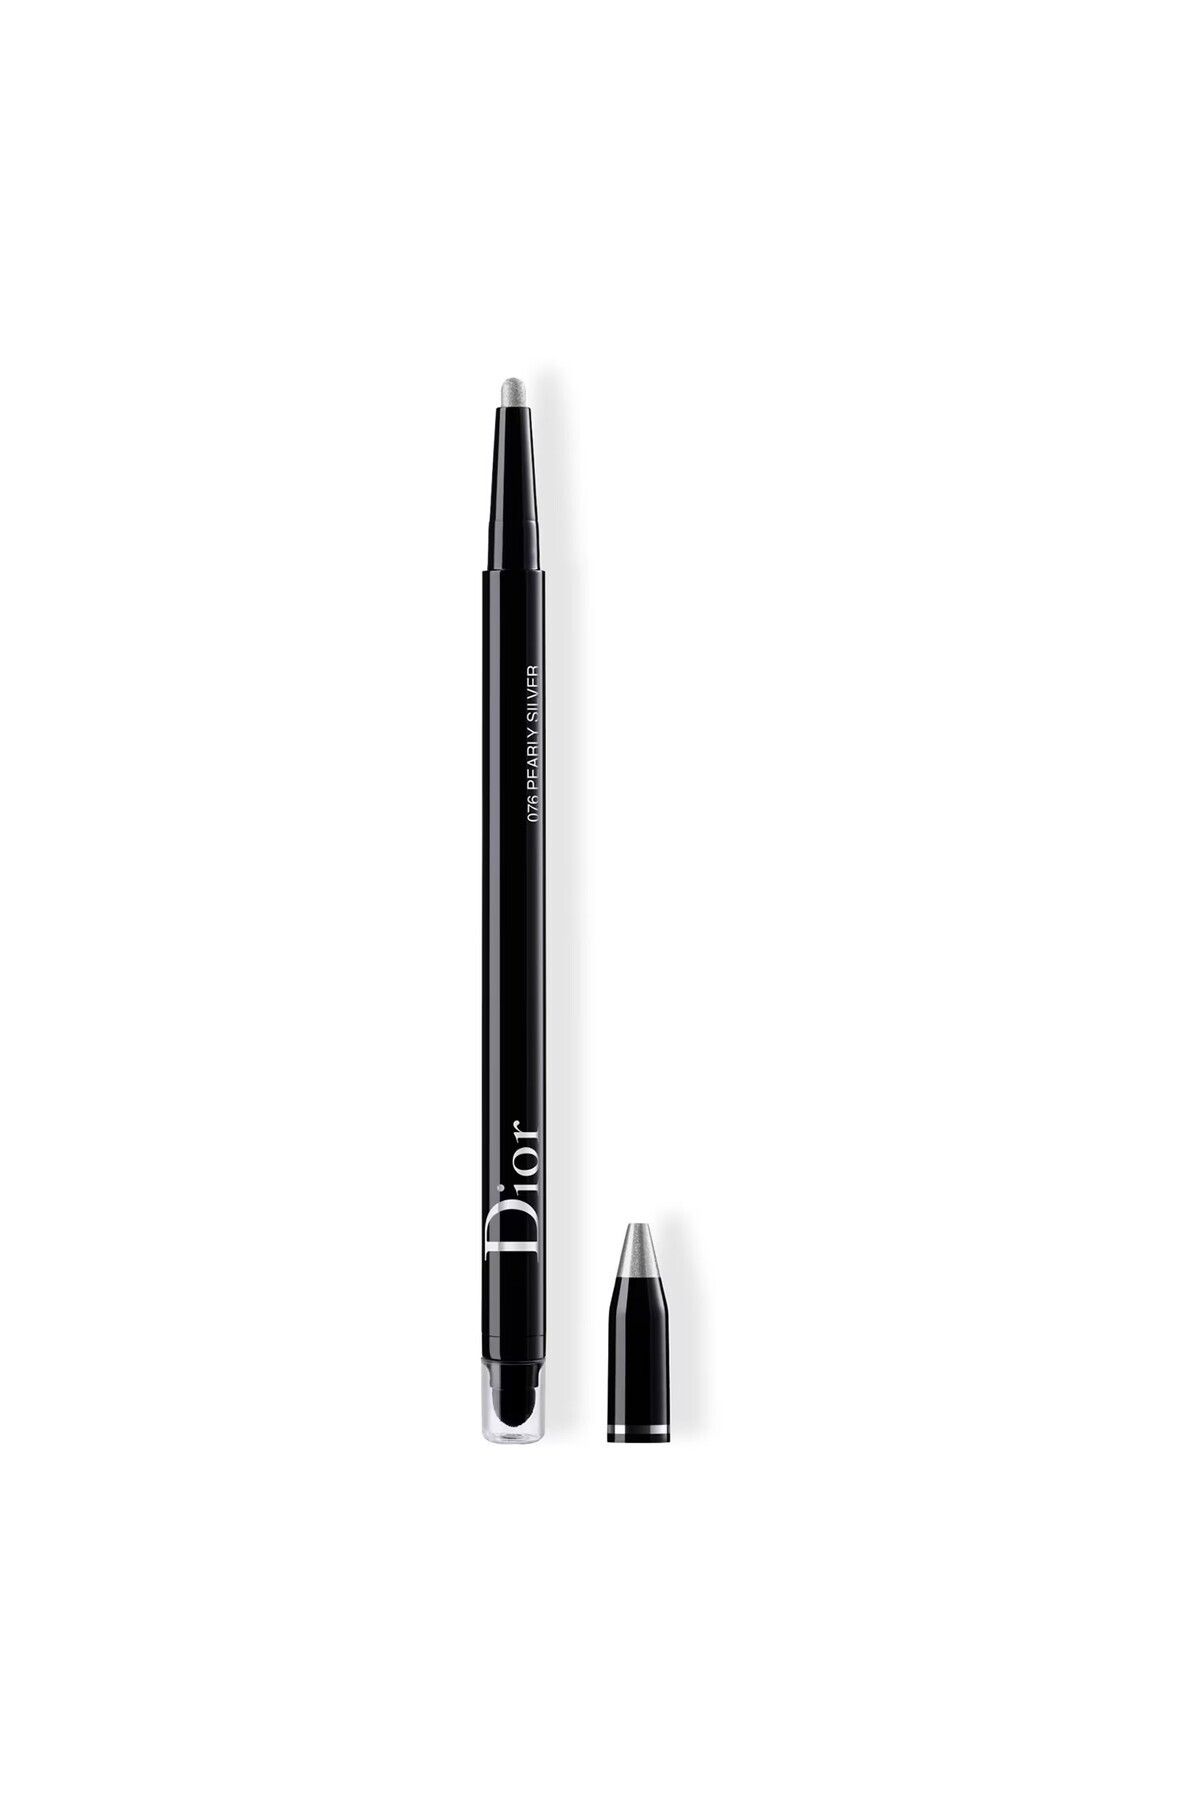 Dior 24H*STYLO WATERPROOF -WEAR-LASTİNG PROTECTİON FOR UP TO 24 HOURS,MATTE EYELİNER